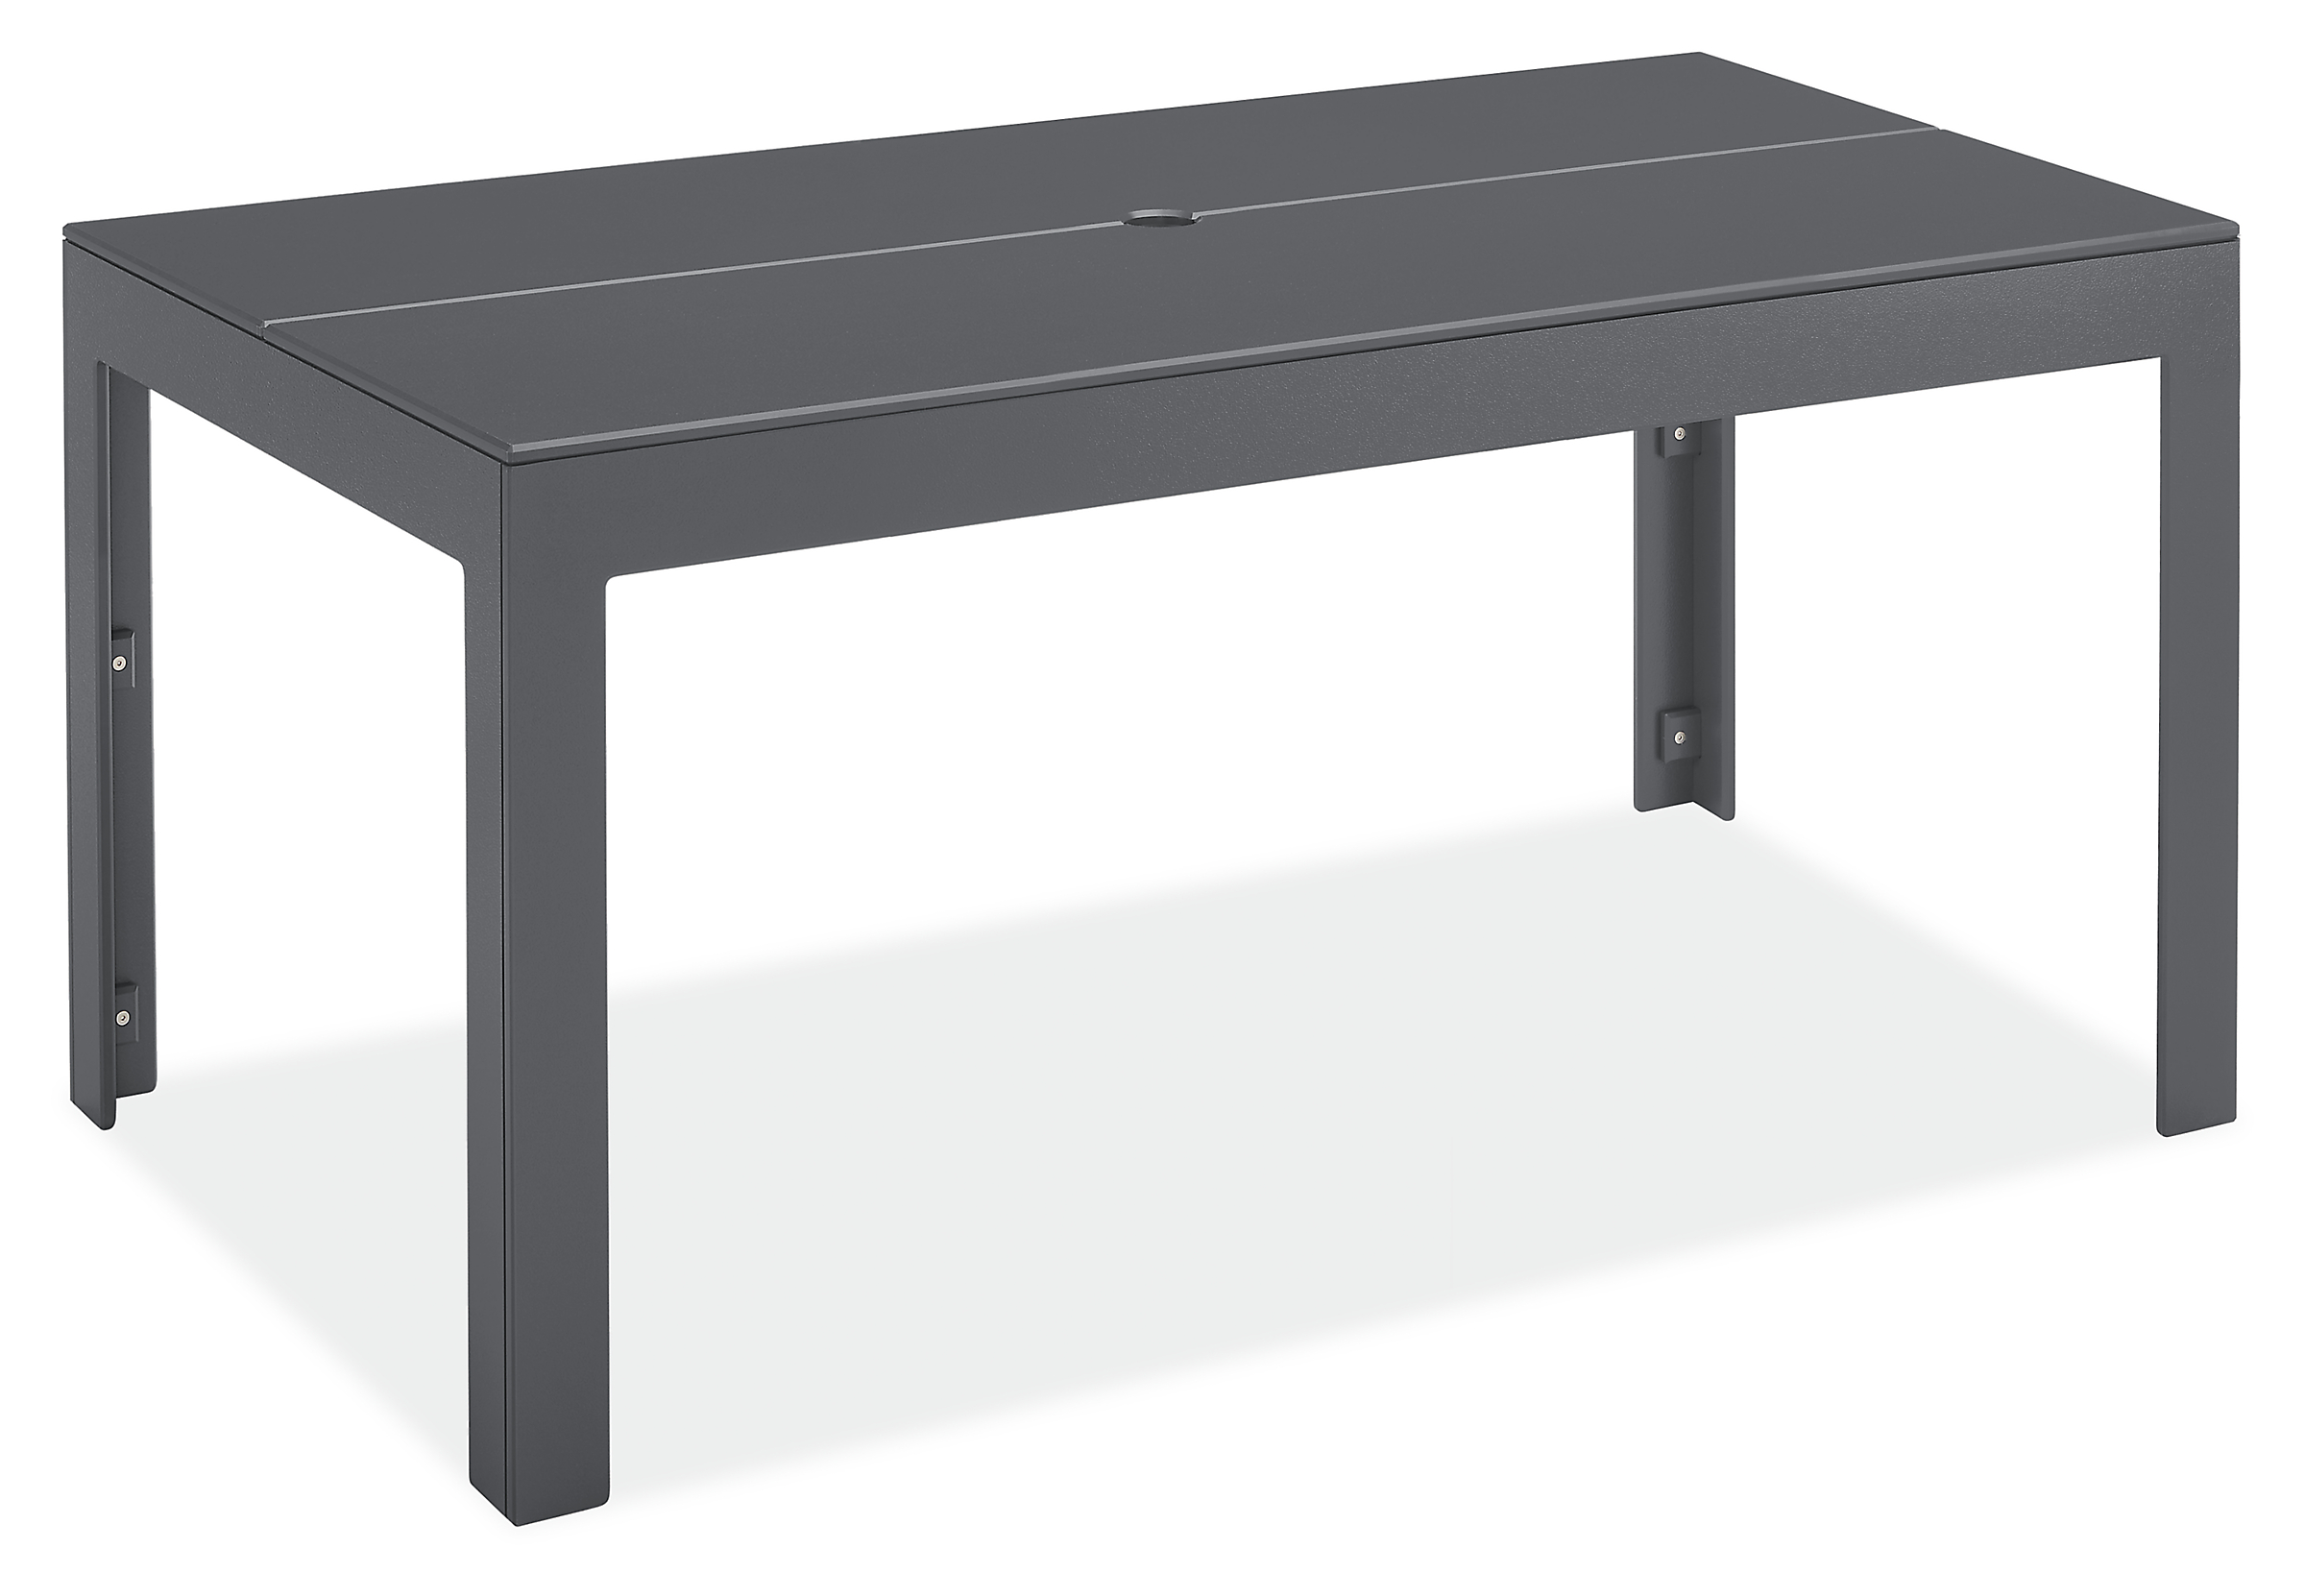 Henry 60w 36d 30h Table with Umbrella Hole